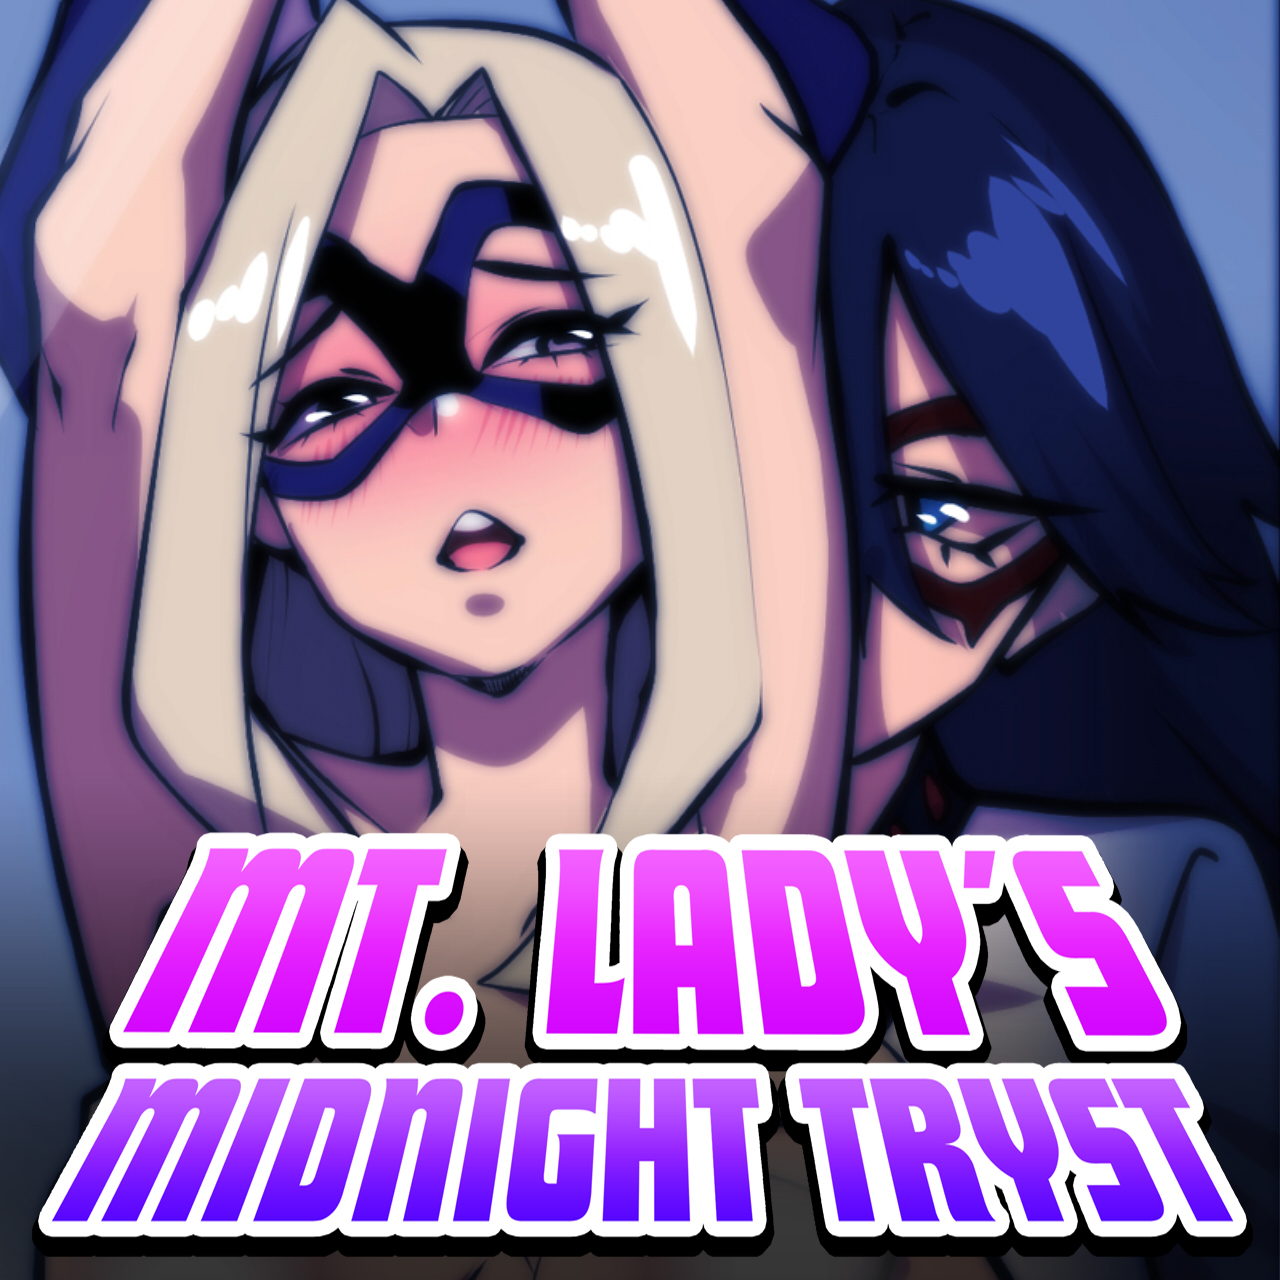 Mt. Lady's Midnight Tryst